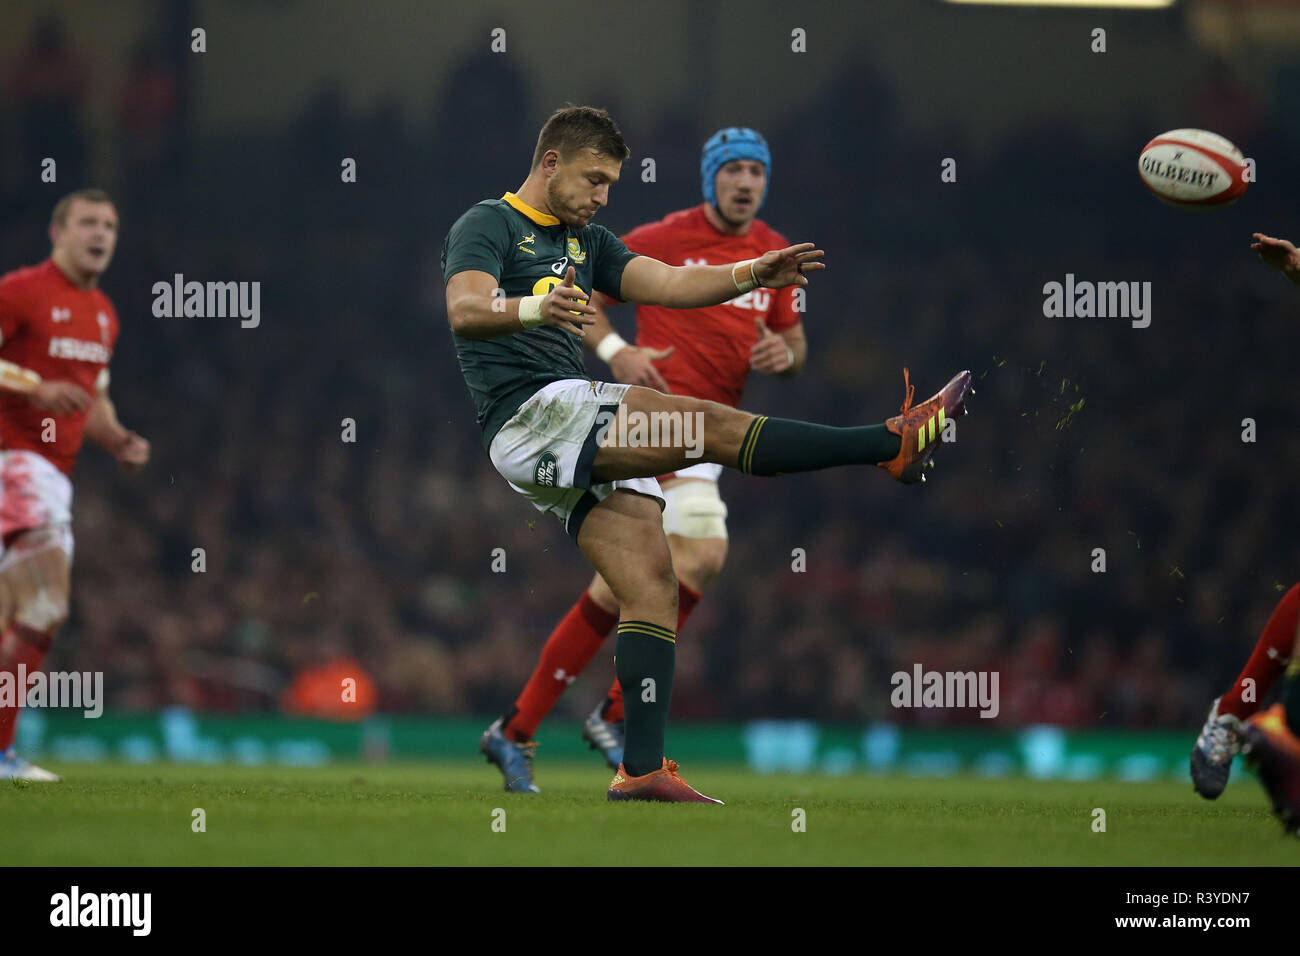 Handre Pollard of South Africa in action. Wales v South Africa, Under  Armour series Autumn international rugby match at the Principality Stadium  in Cardiff ,Wales , UK on Saturday 24th November 2018.